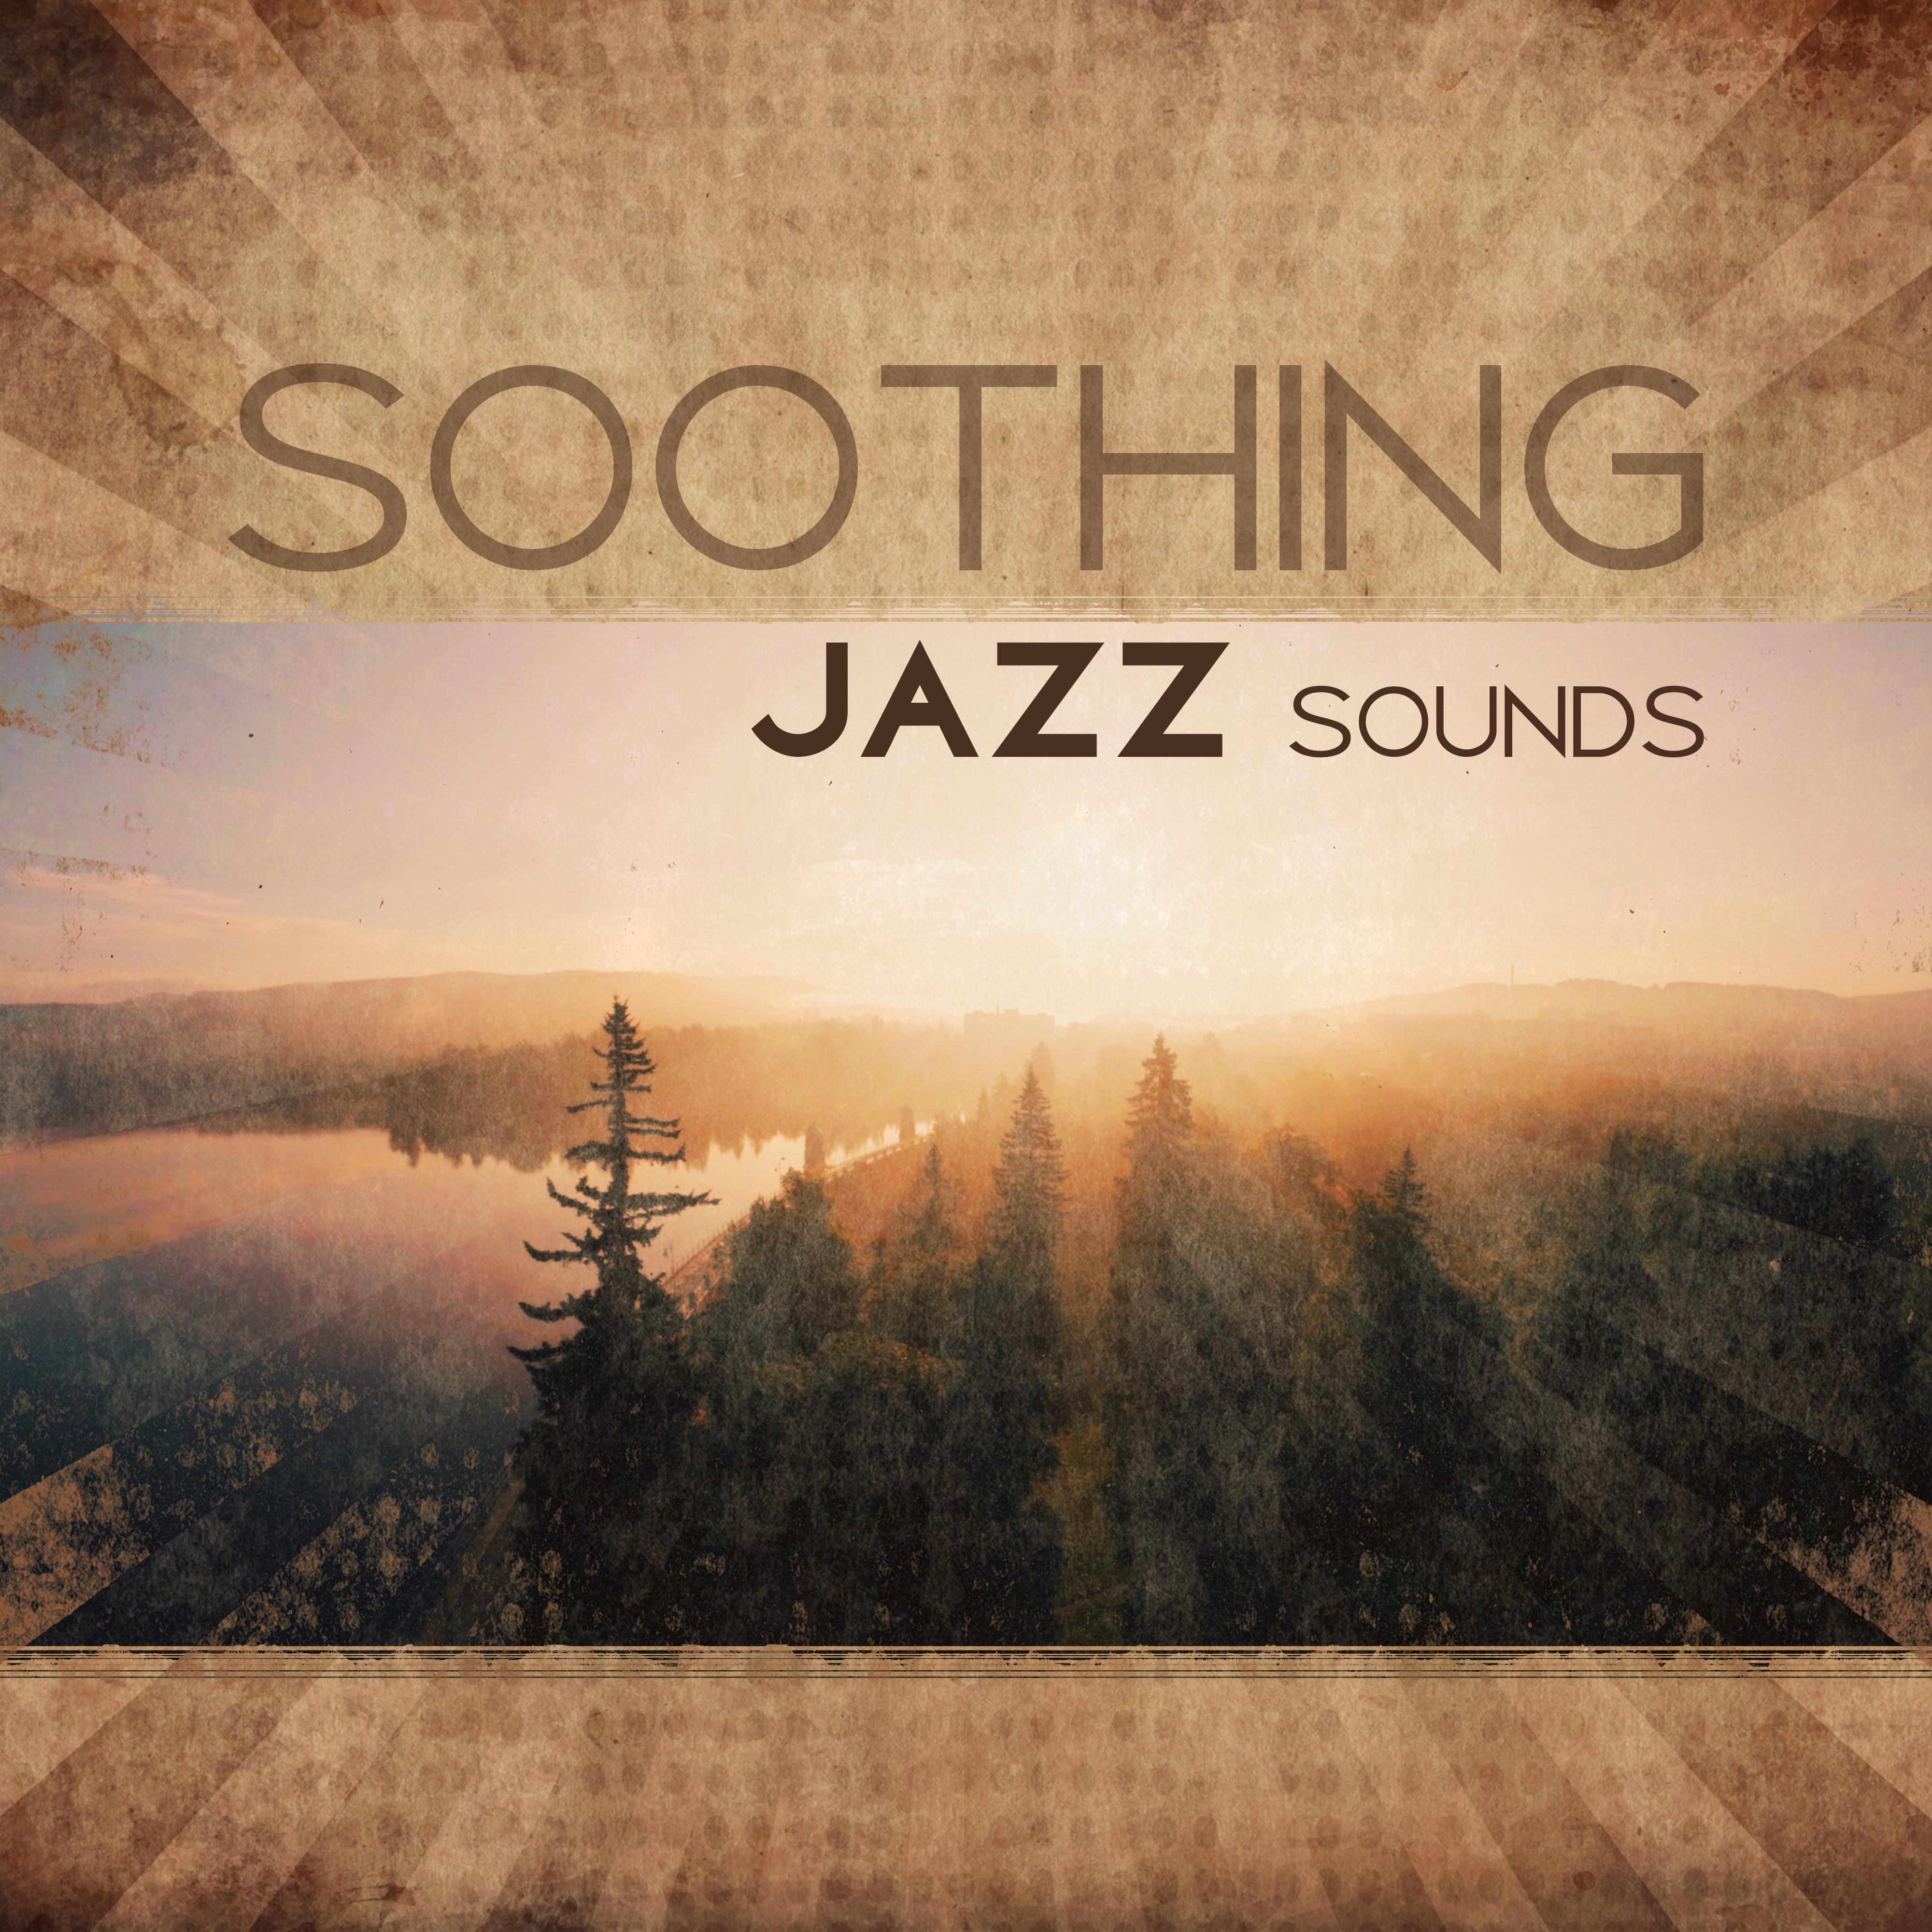 Soothing Jazz Sounds  Relaxing Piano Sounds, Smooth Jazz for Evening, Rest with Best Music, Moonlight Jazz